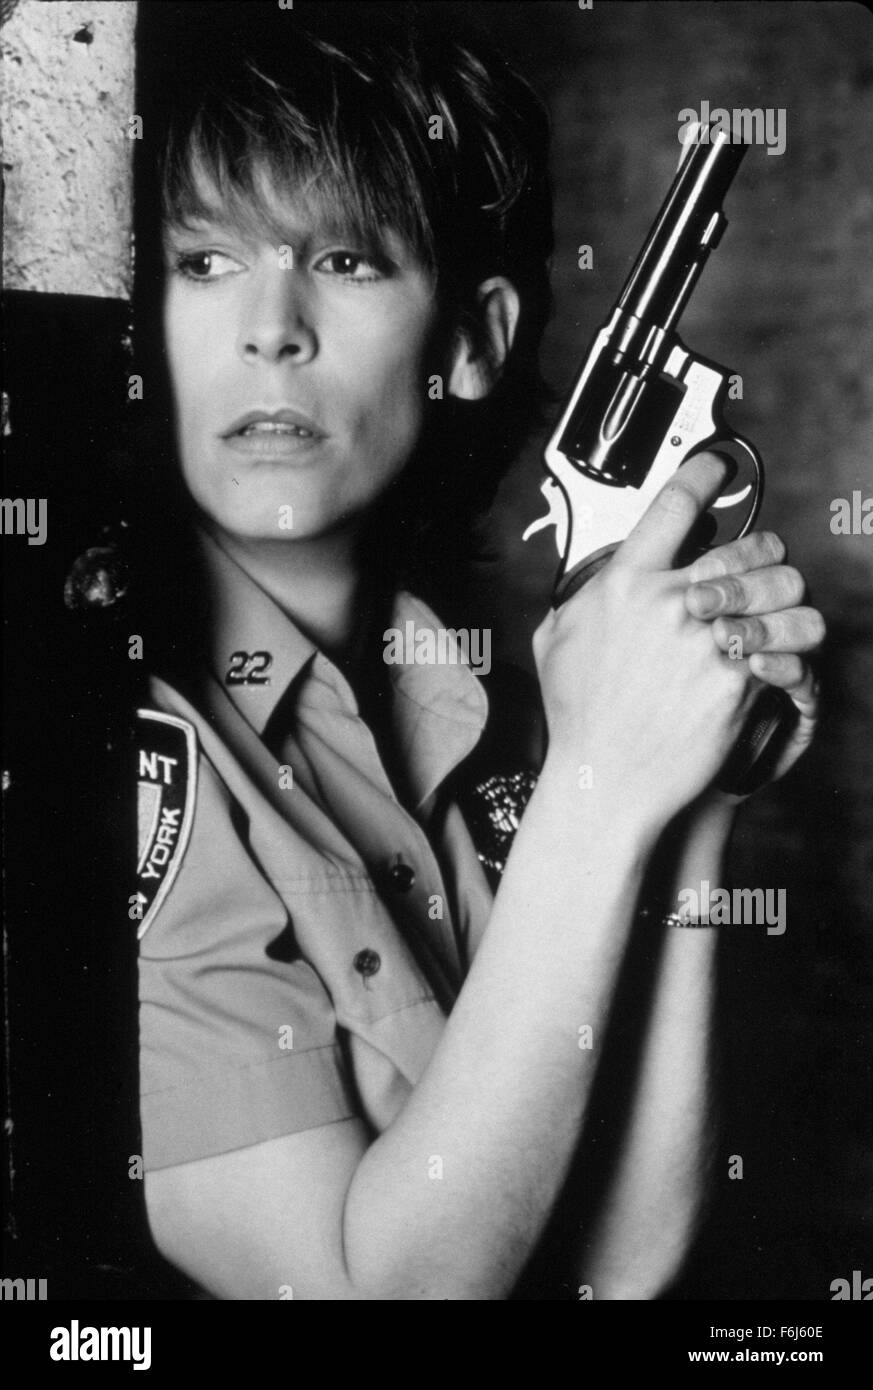 RELEASE DATE: March 16, 1990   MOVIE TITLE: Blue Steel   STUDIO: Lightning Pictures   DIRECTOR: Kathryn Bigelow   PLOT: A female rookie in the police force engages in a cat and mouse game with a pistol wielding psychopath who becomes obsessed with her.   PICTURED: JAMIE LEE CURTIS as Megan Turner.   (Credit Image: c Lightning Pictures/Entertainment Pictures) Stock Photo